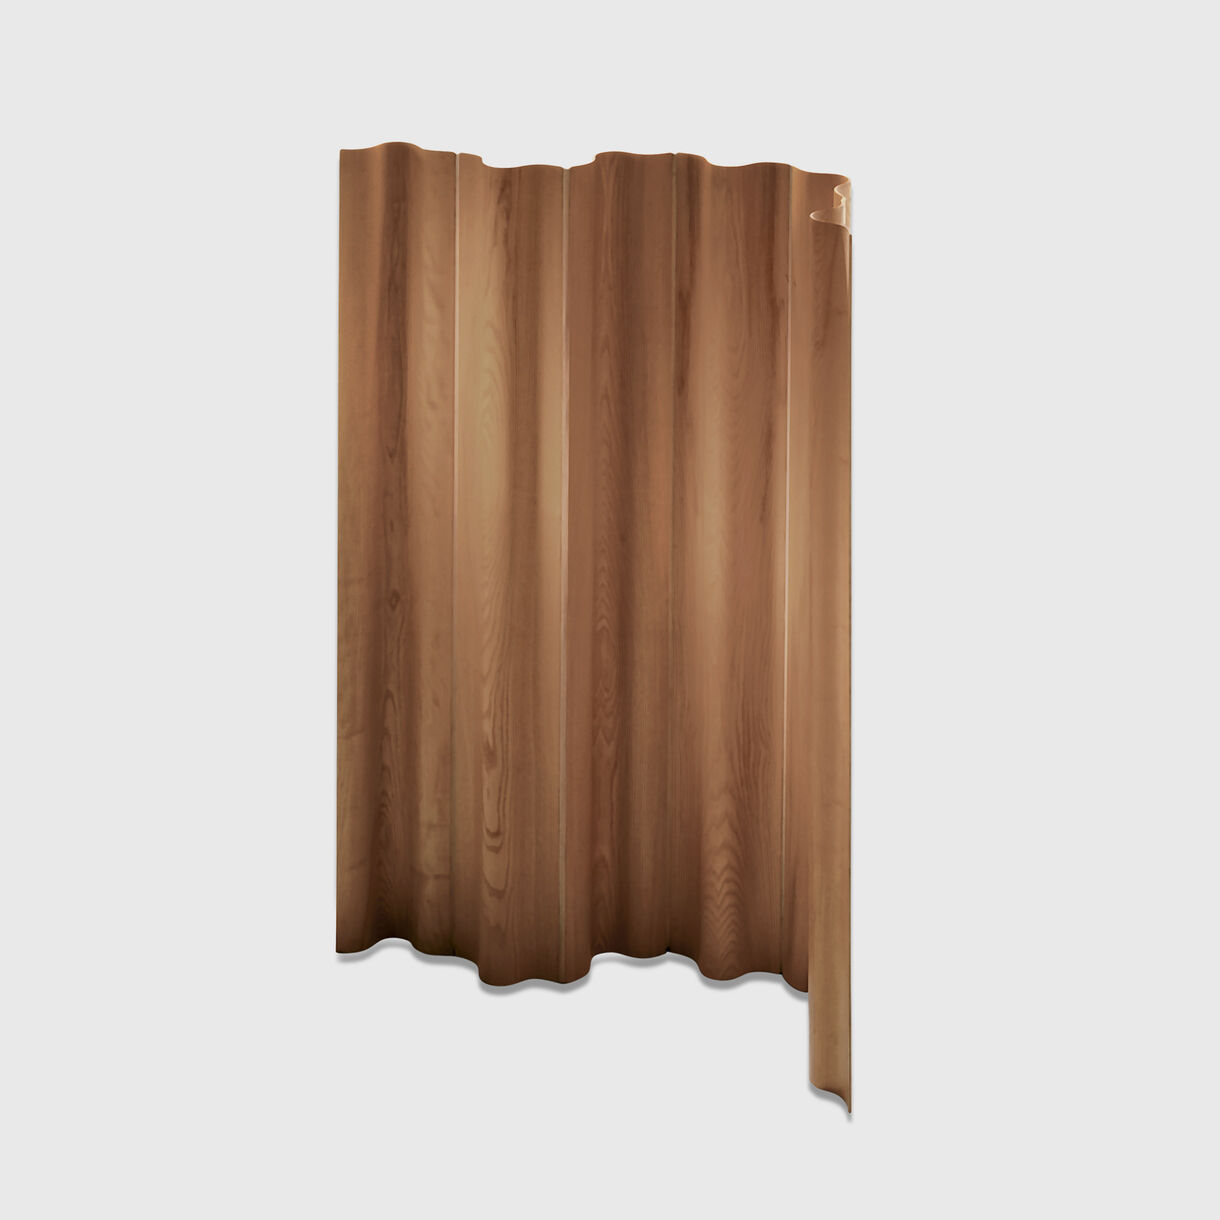 Eames Moulded Plywood Folding Screen, Walnut